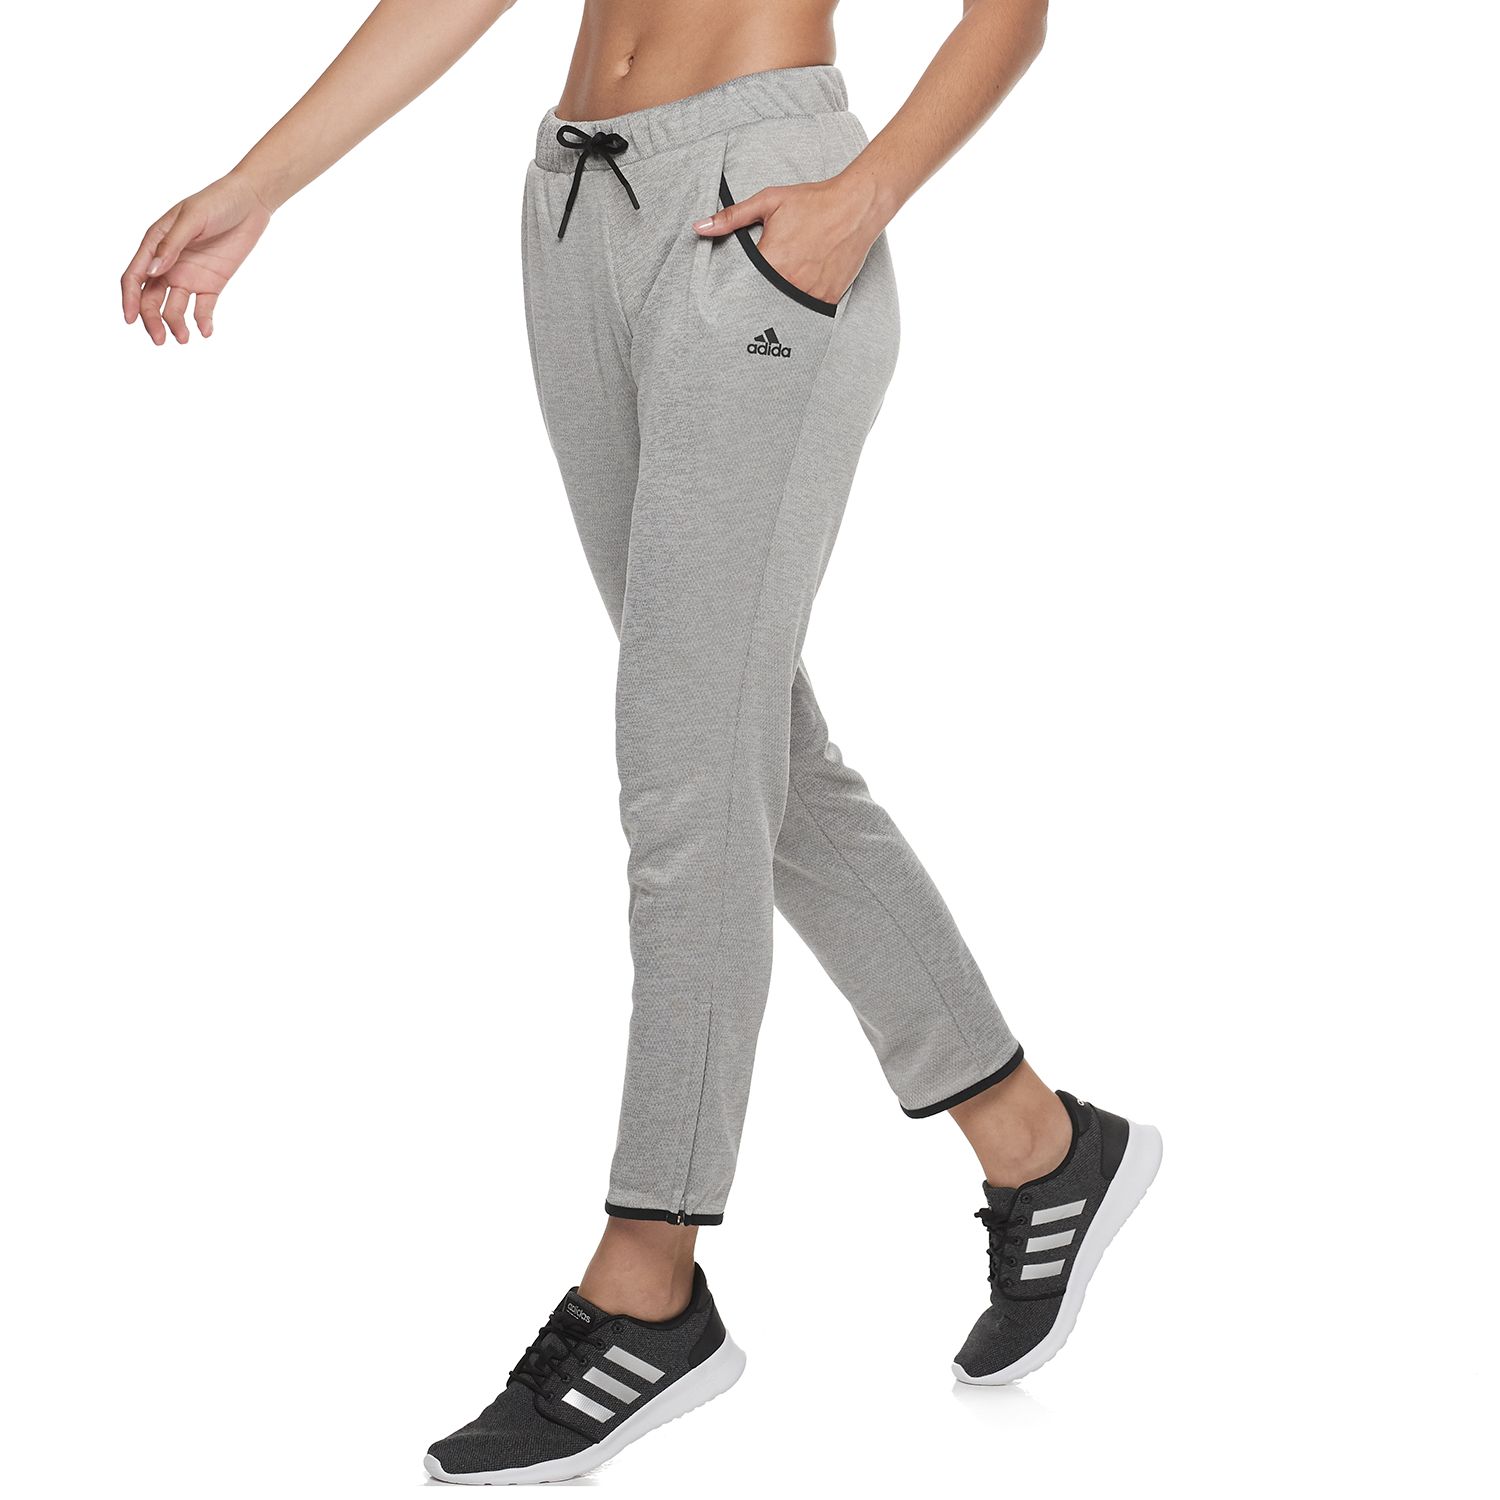 adidas women's apparel on clearance